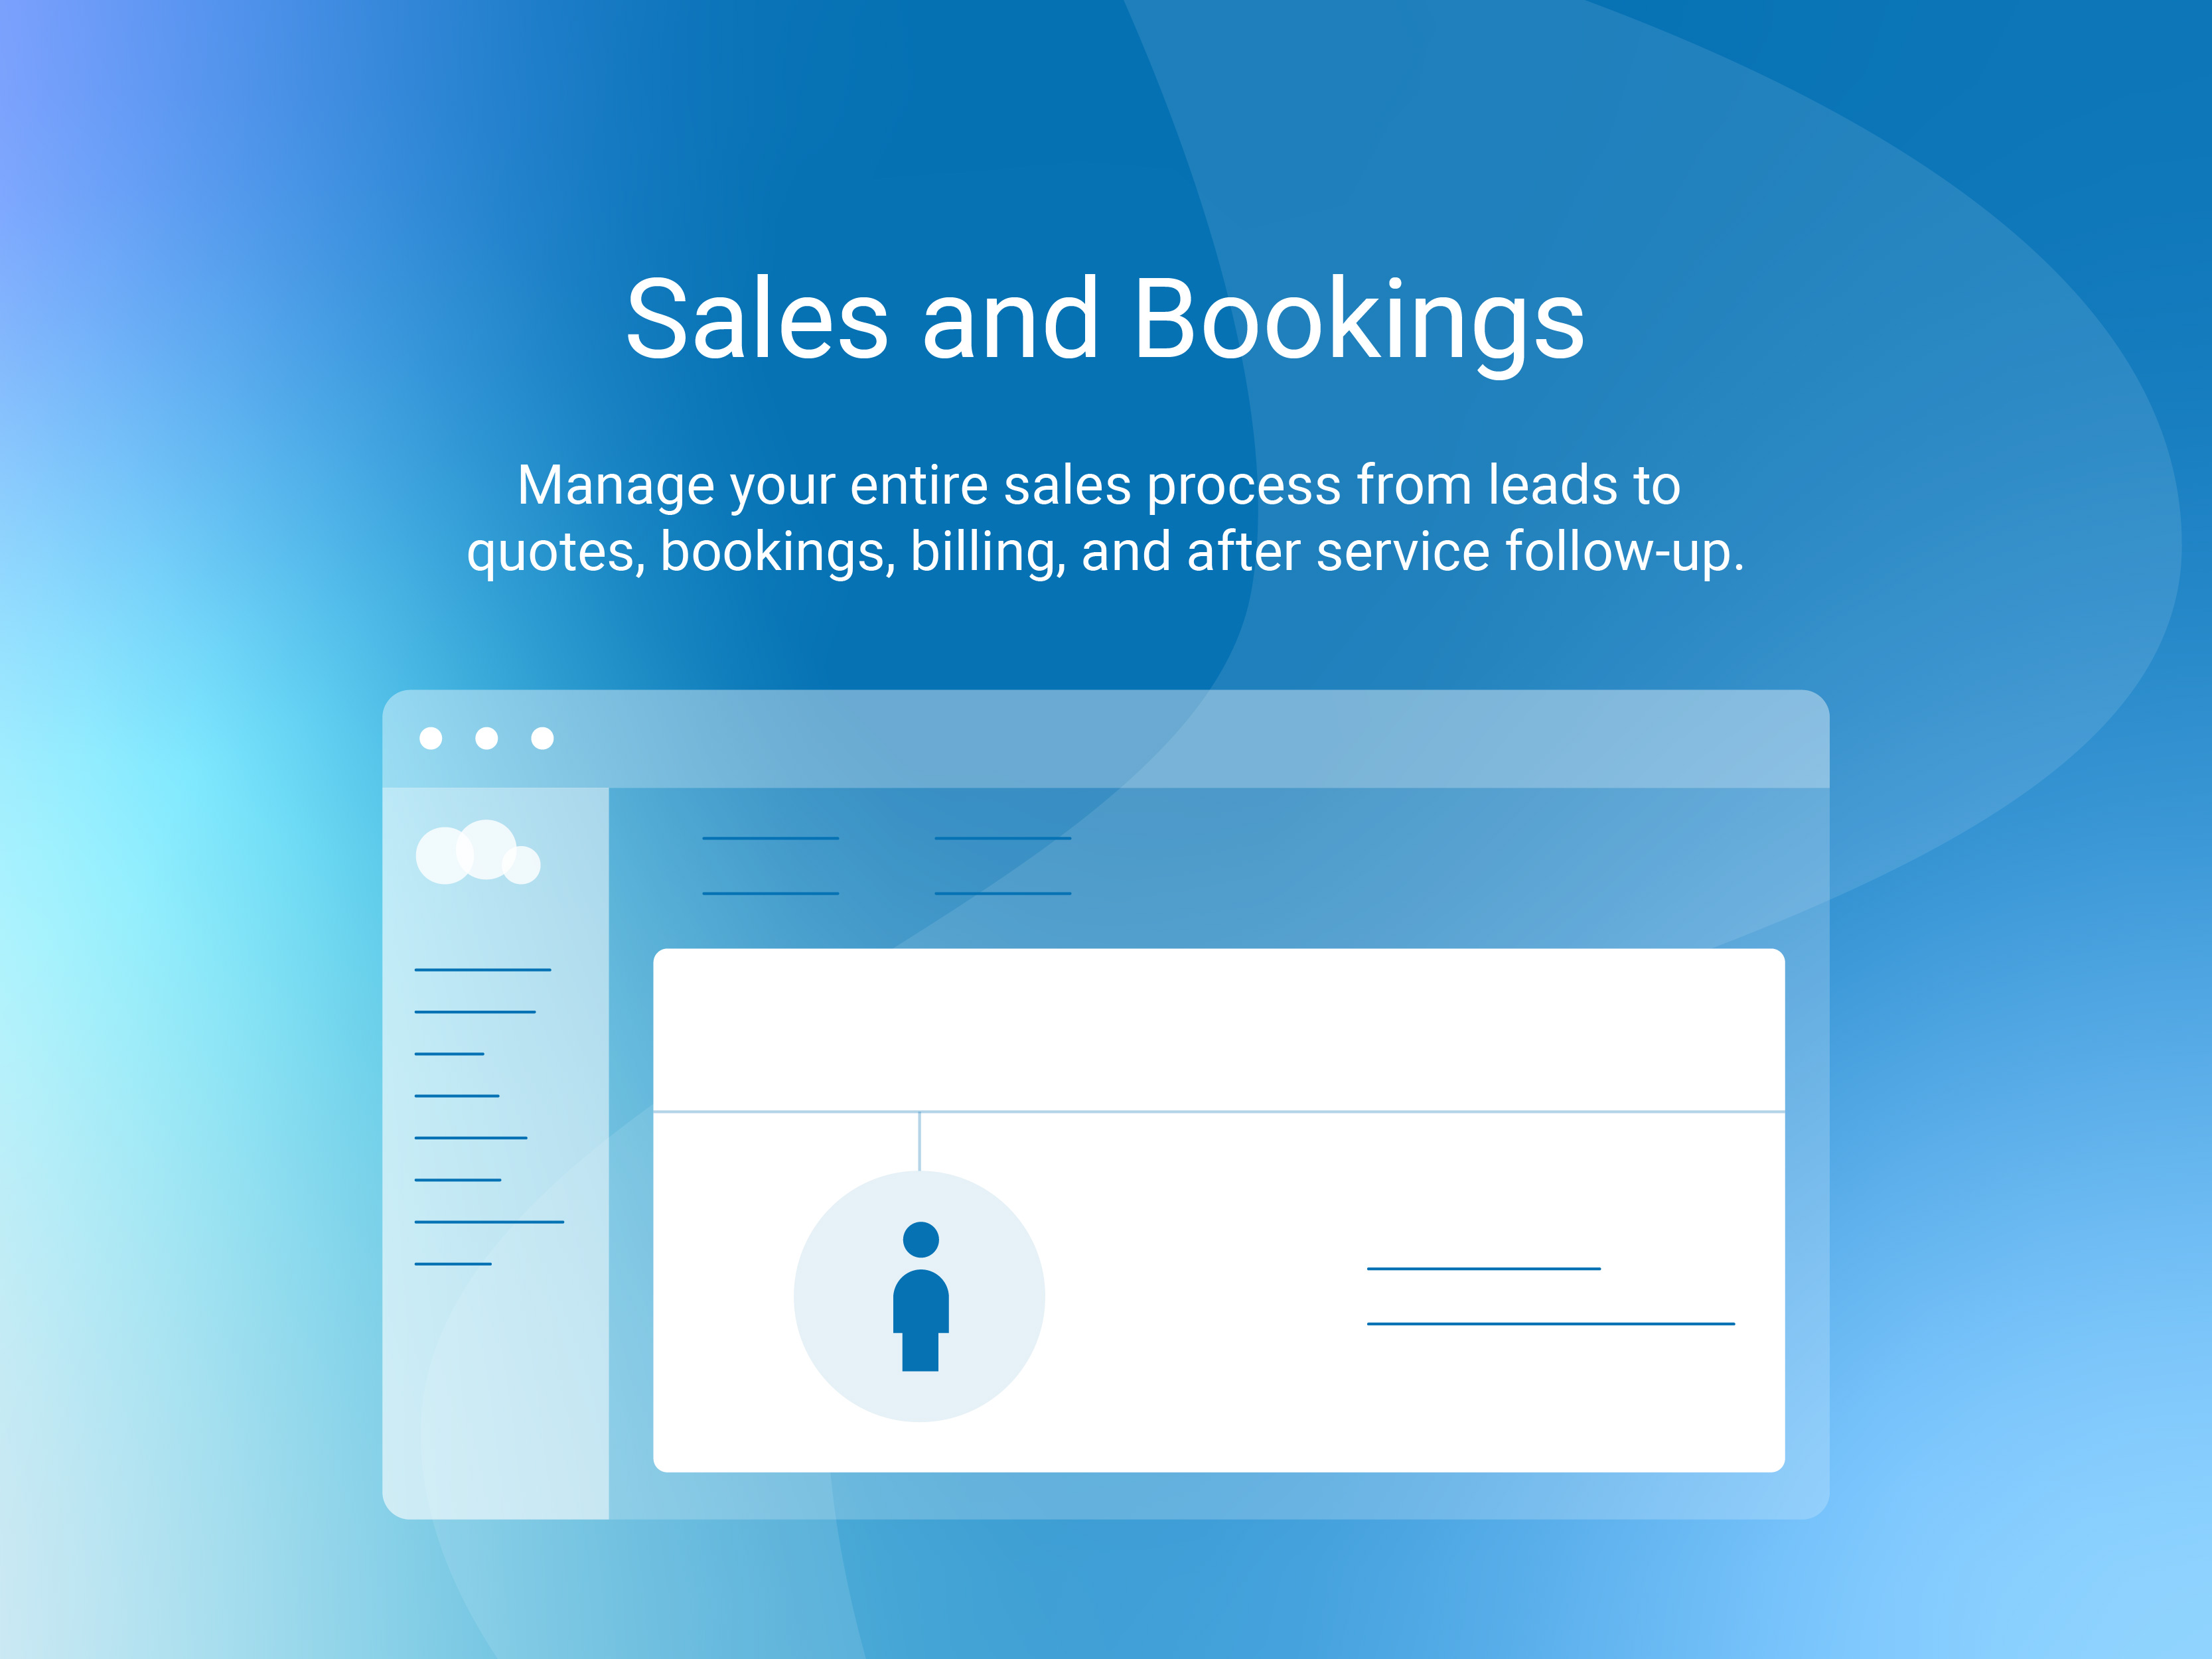 byondpro Sales and Bookings software